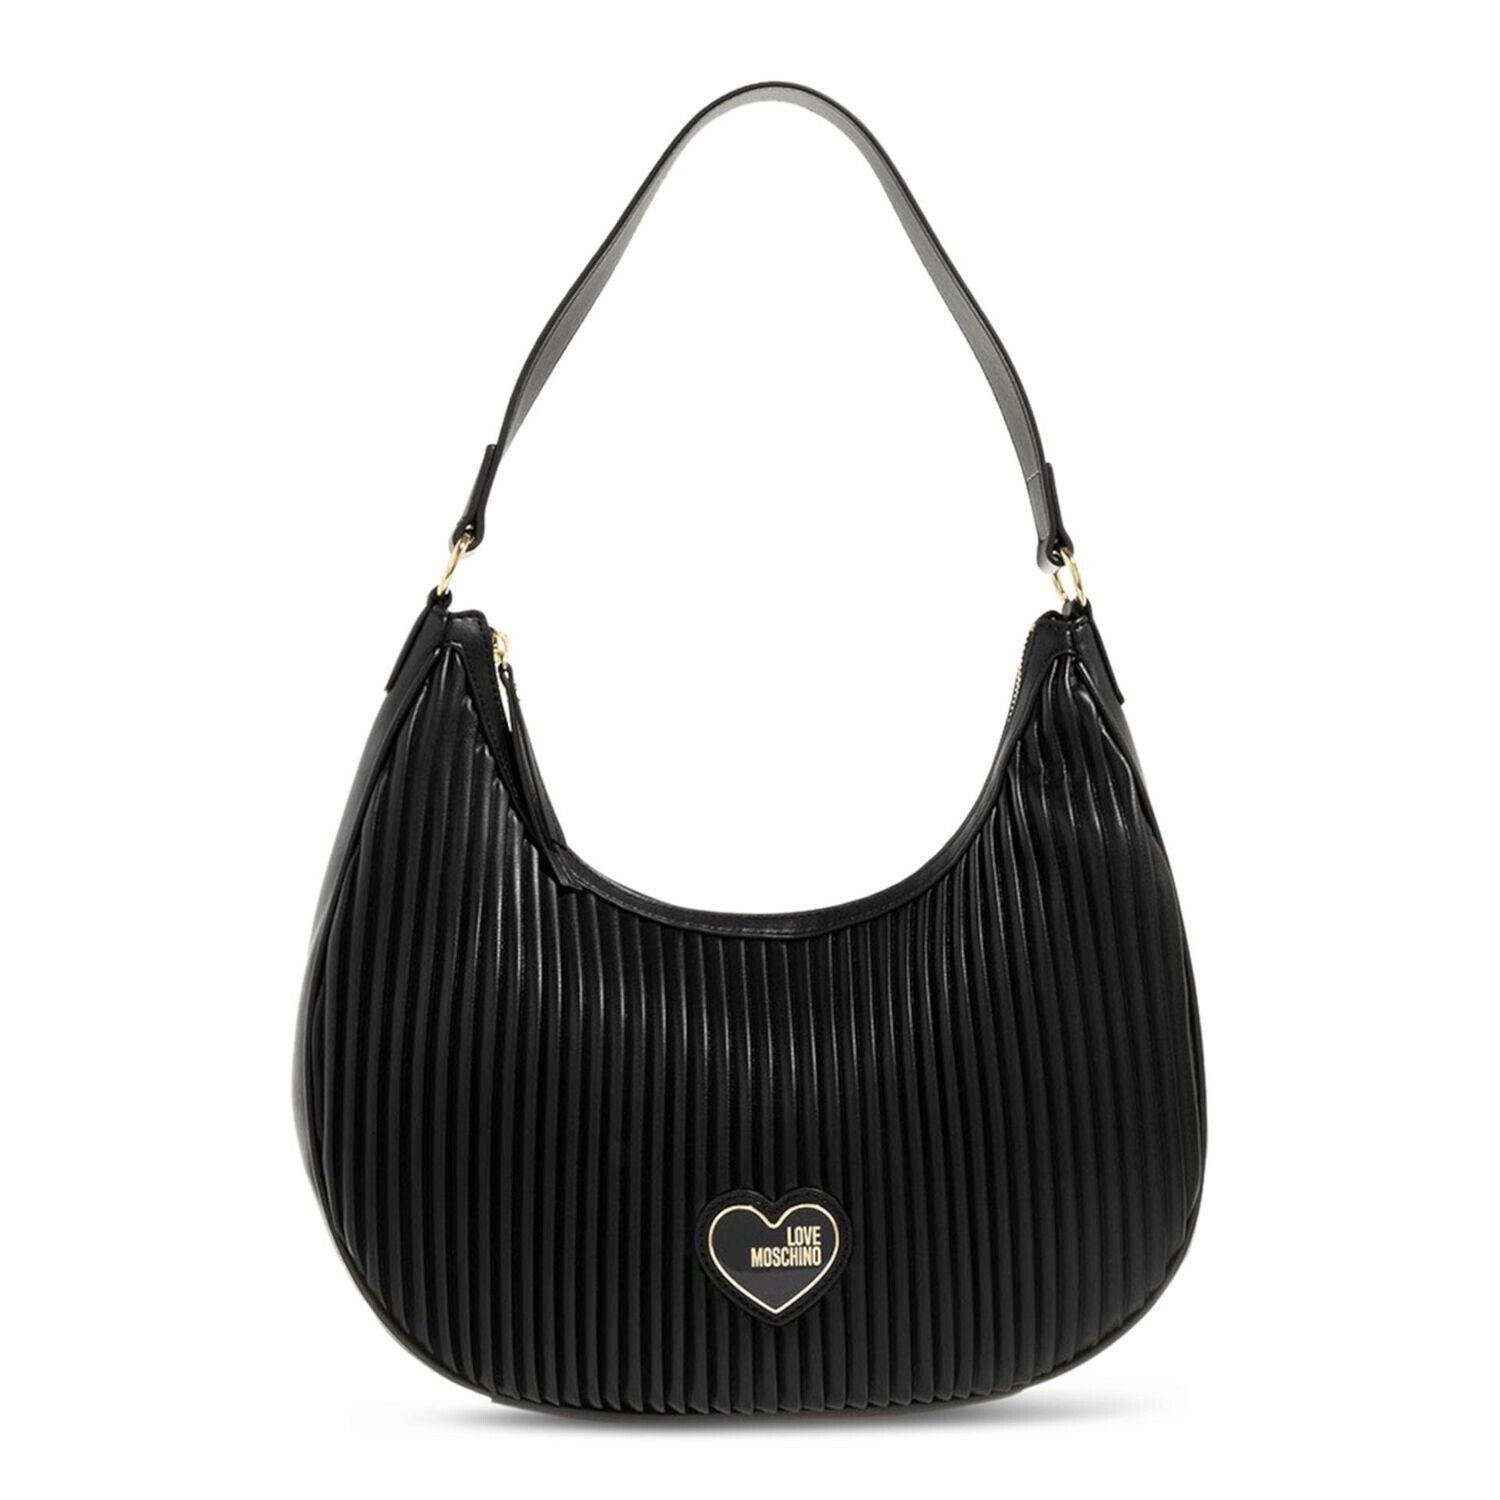 Love Moschino Black Piped Shoulder Bag